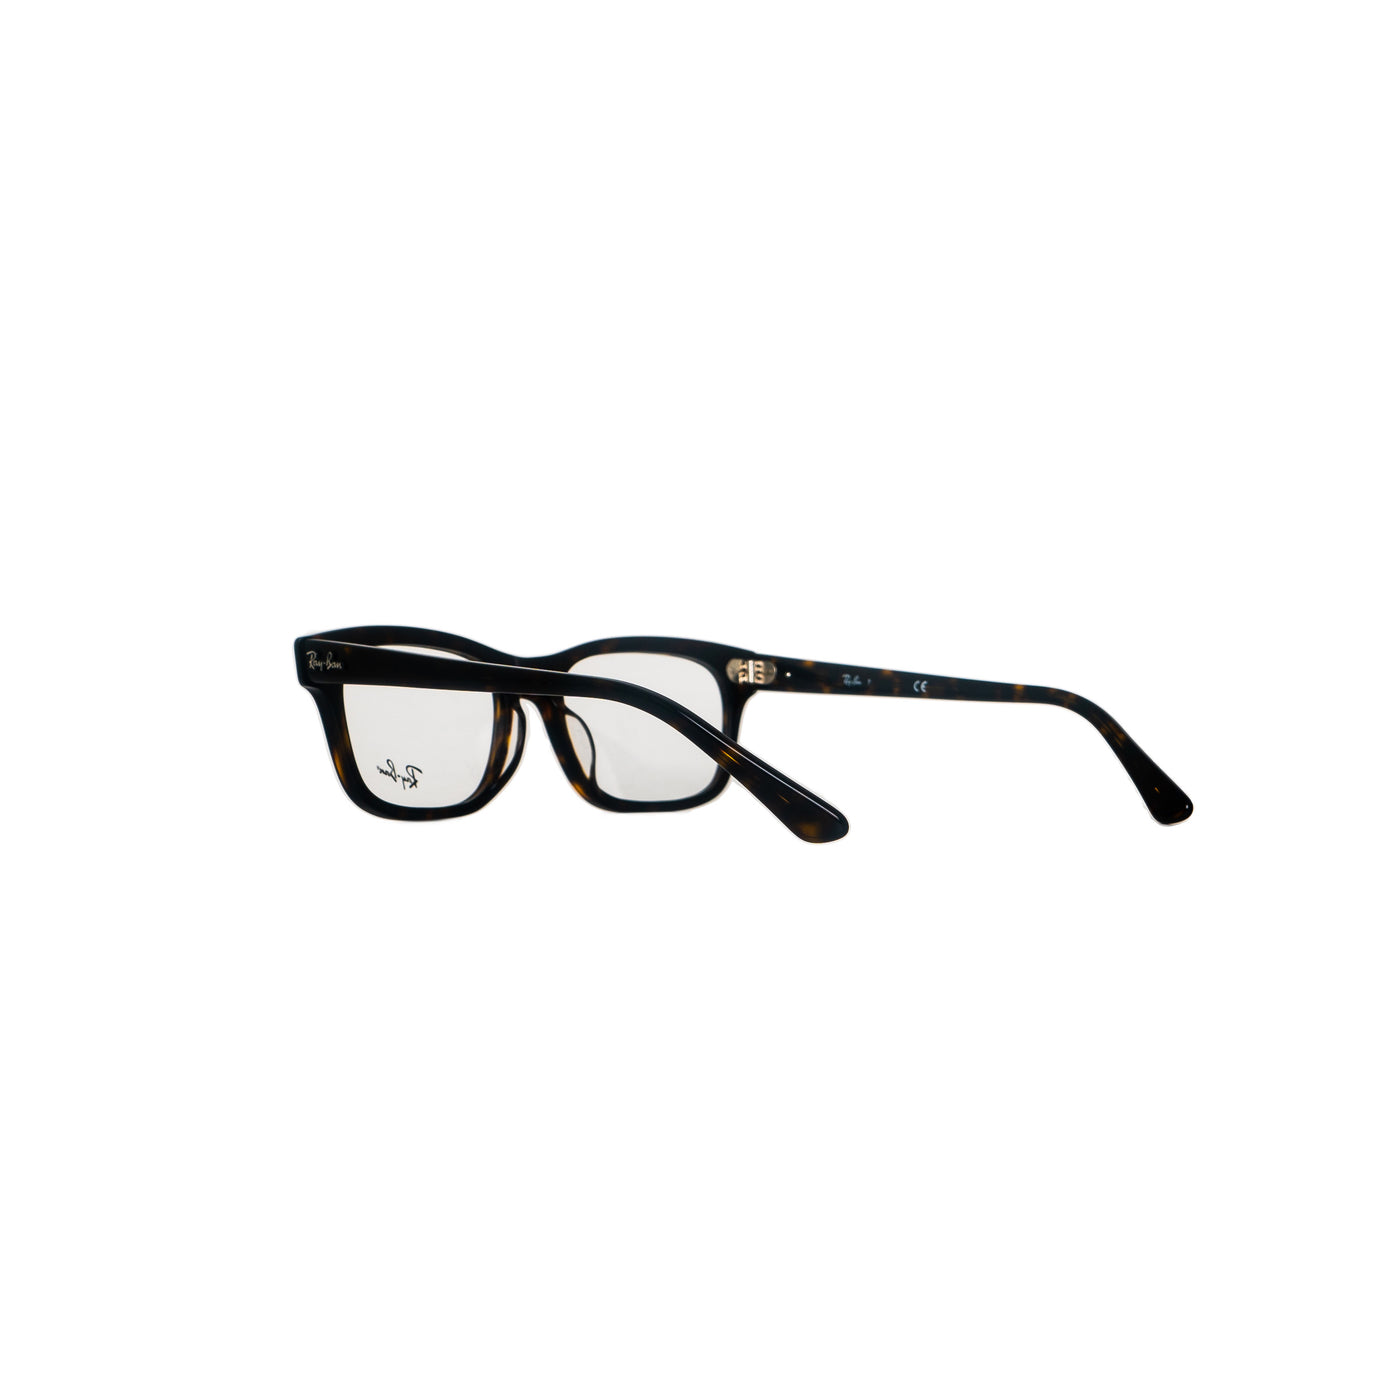 Ray-Ban Eyeglasses | RB5383F201254 - Vision Express Optical Philippines